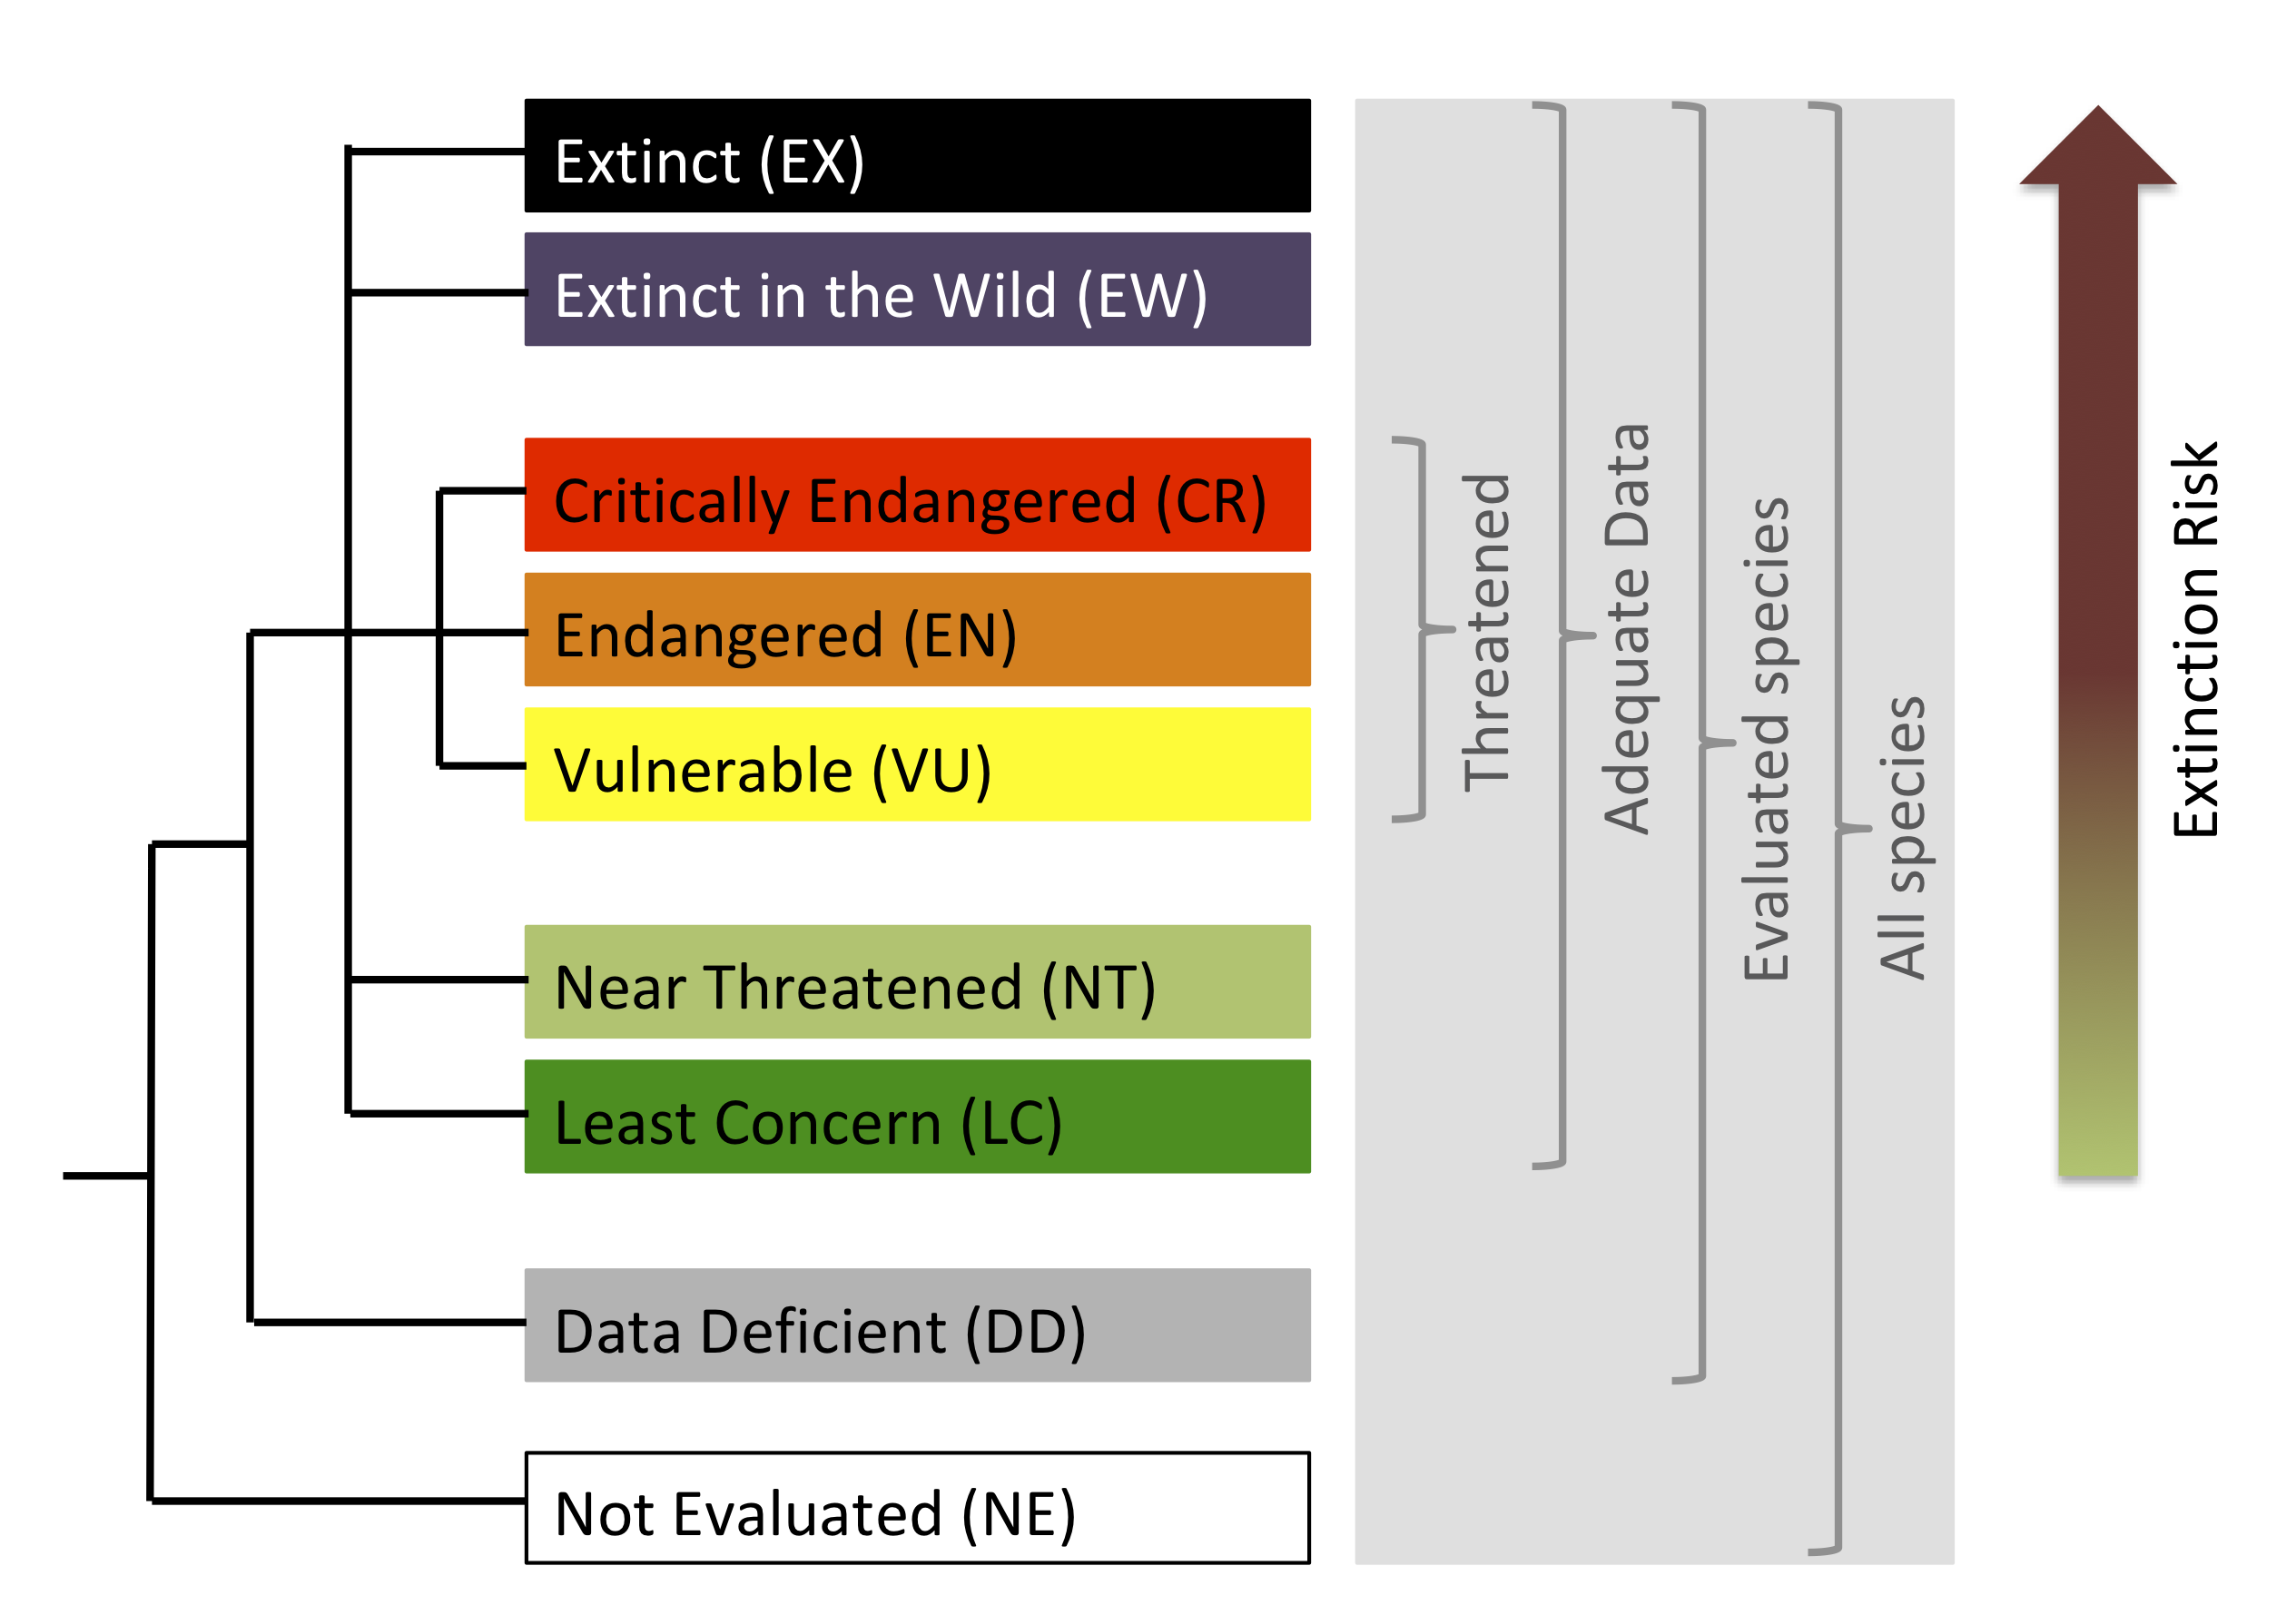 **Figure 1. The IUCN red list categories. Adapted from [@IUCN2012].**